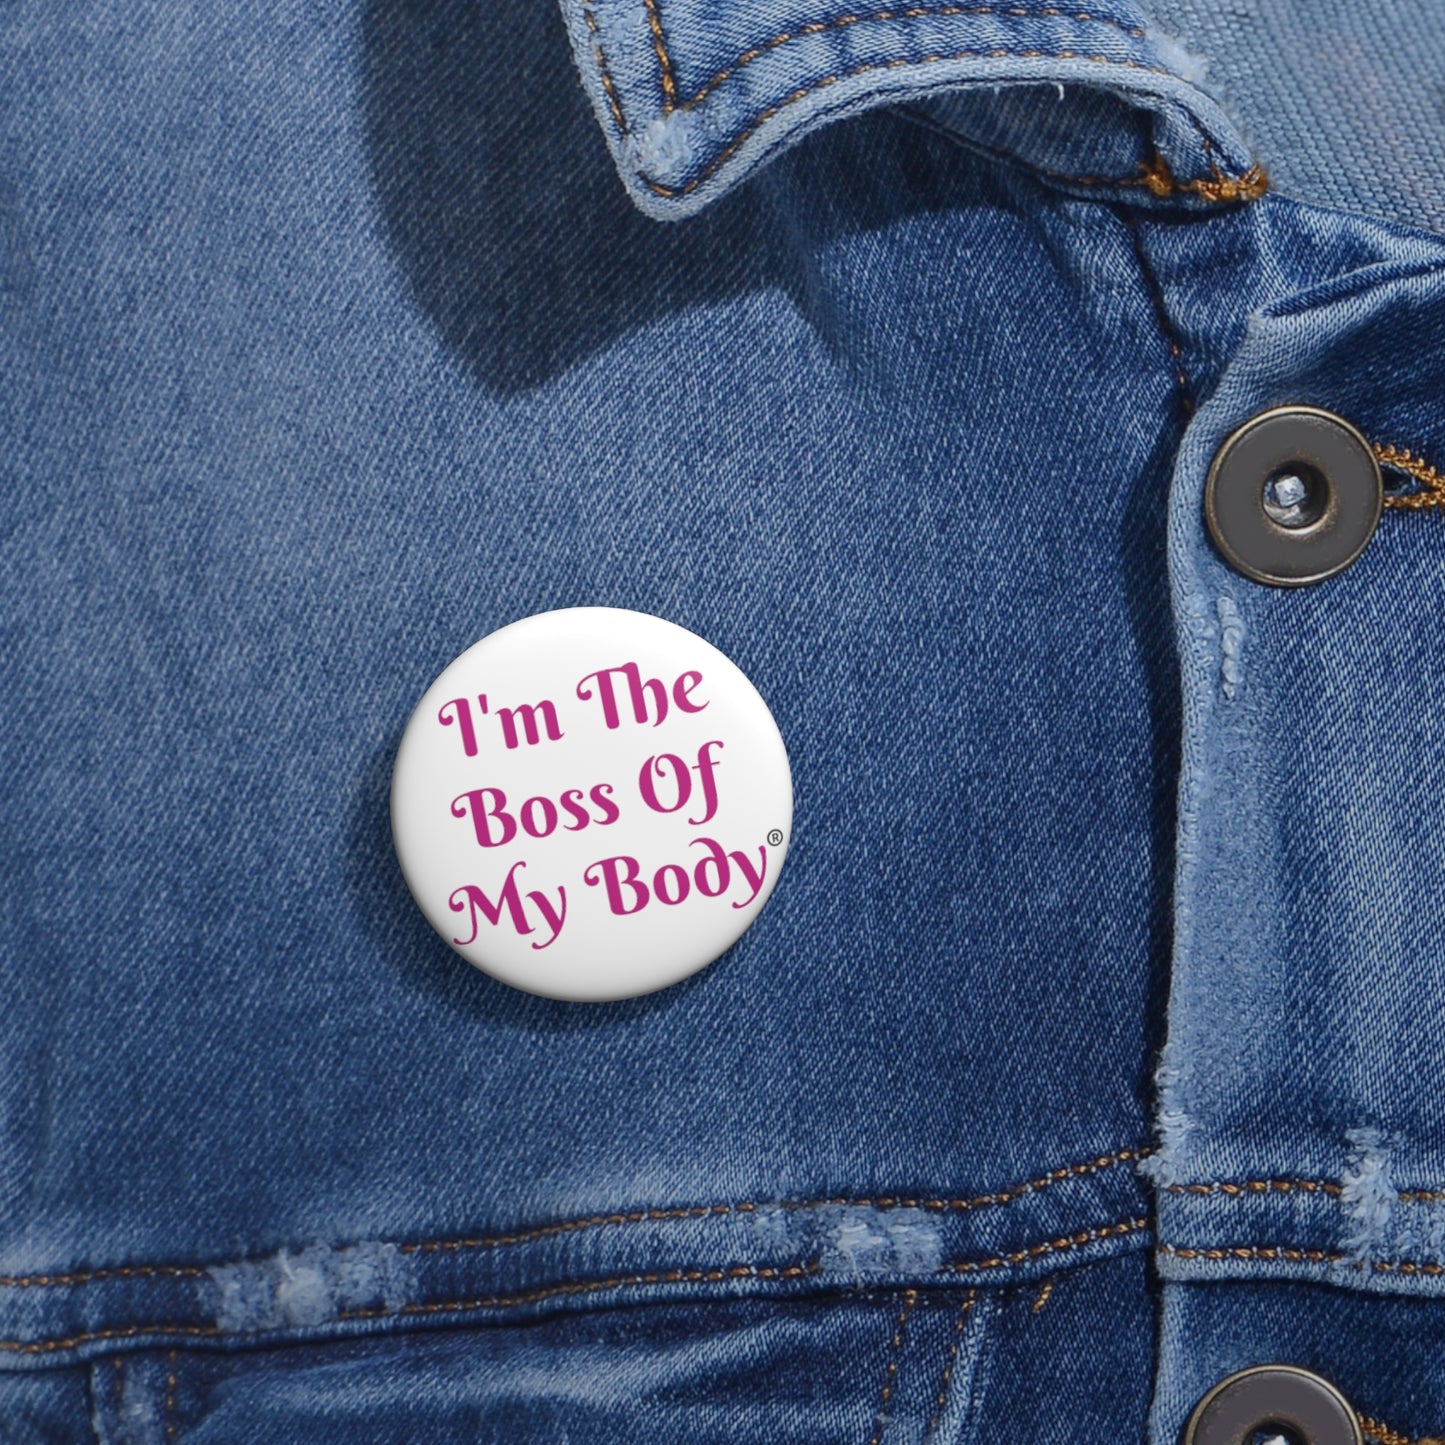 I AM the Boss Of My Body Pin Custom Pin Buttons